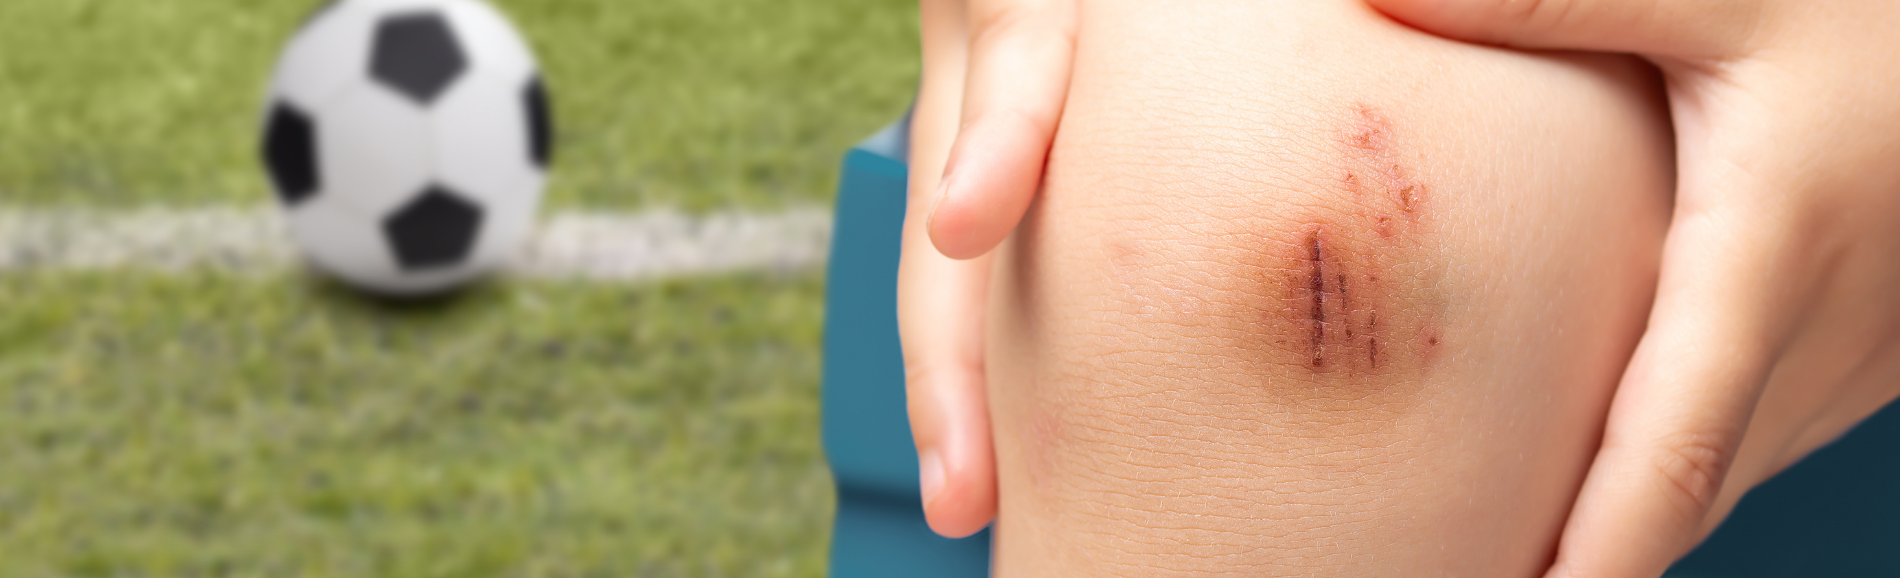 Close up of child's scrapped knee with soccer ball in background.